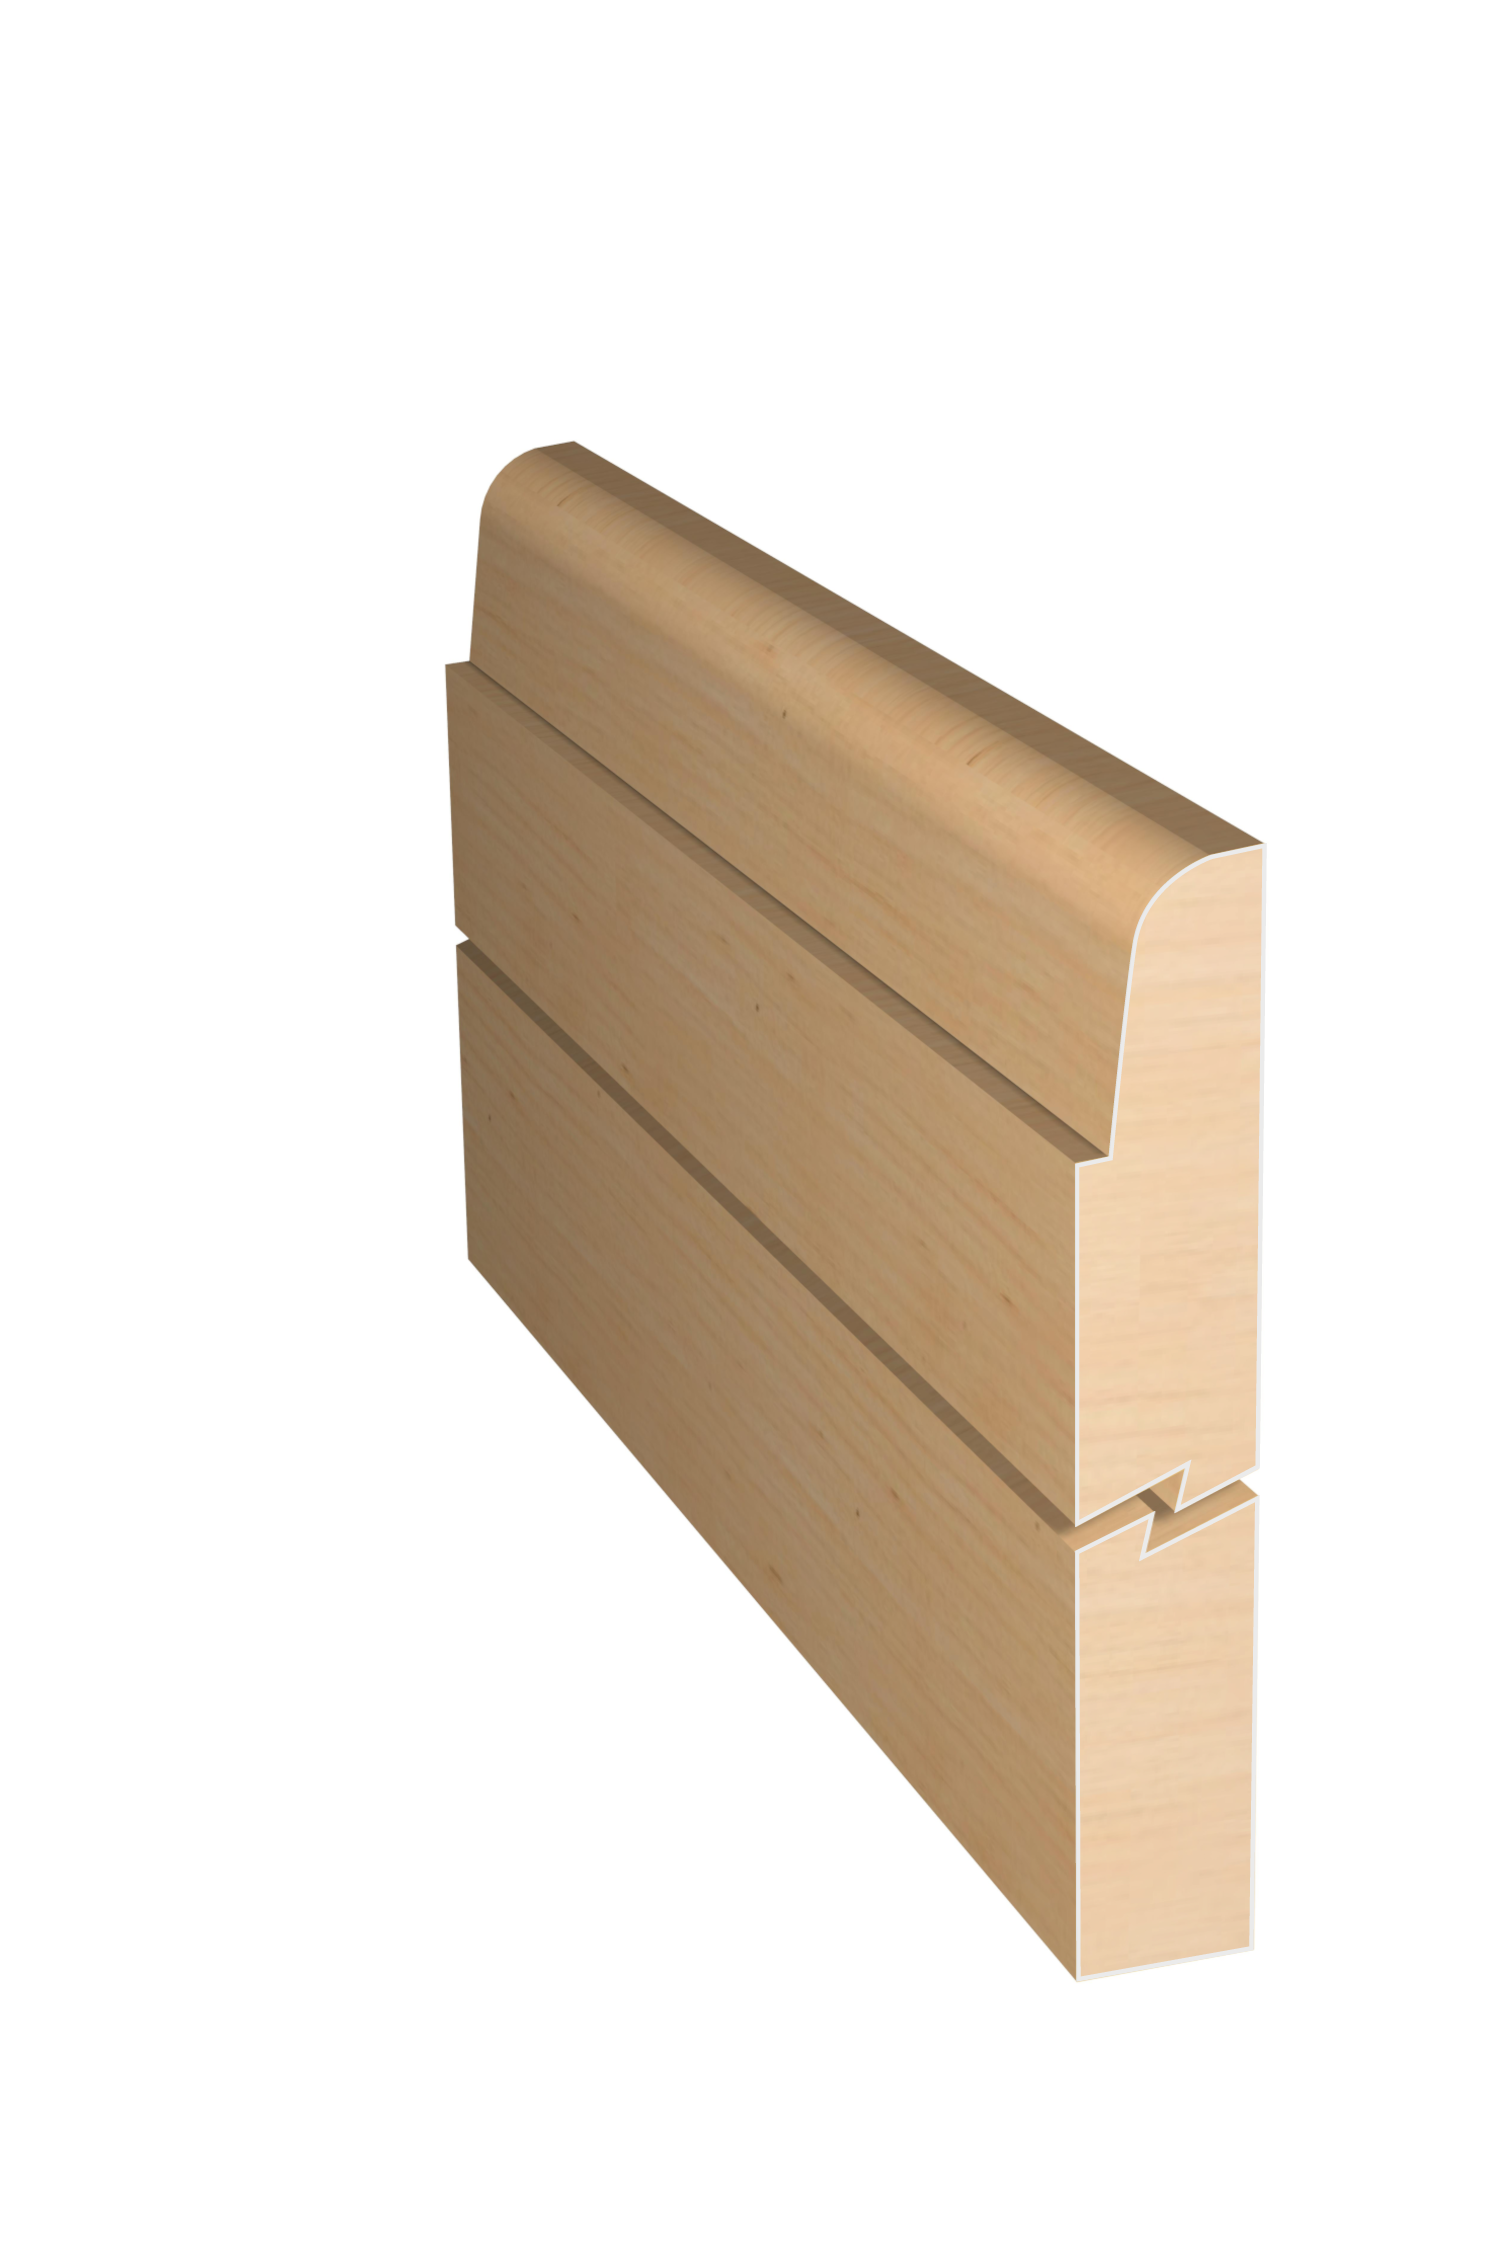 Three dimensional rendering of custom edge profile wood molding SKPL71 made by Public Lumber Company in Detroit.